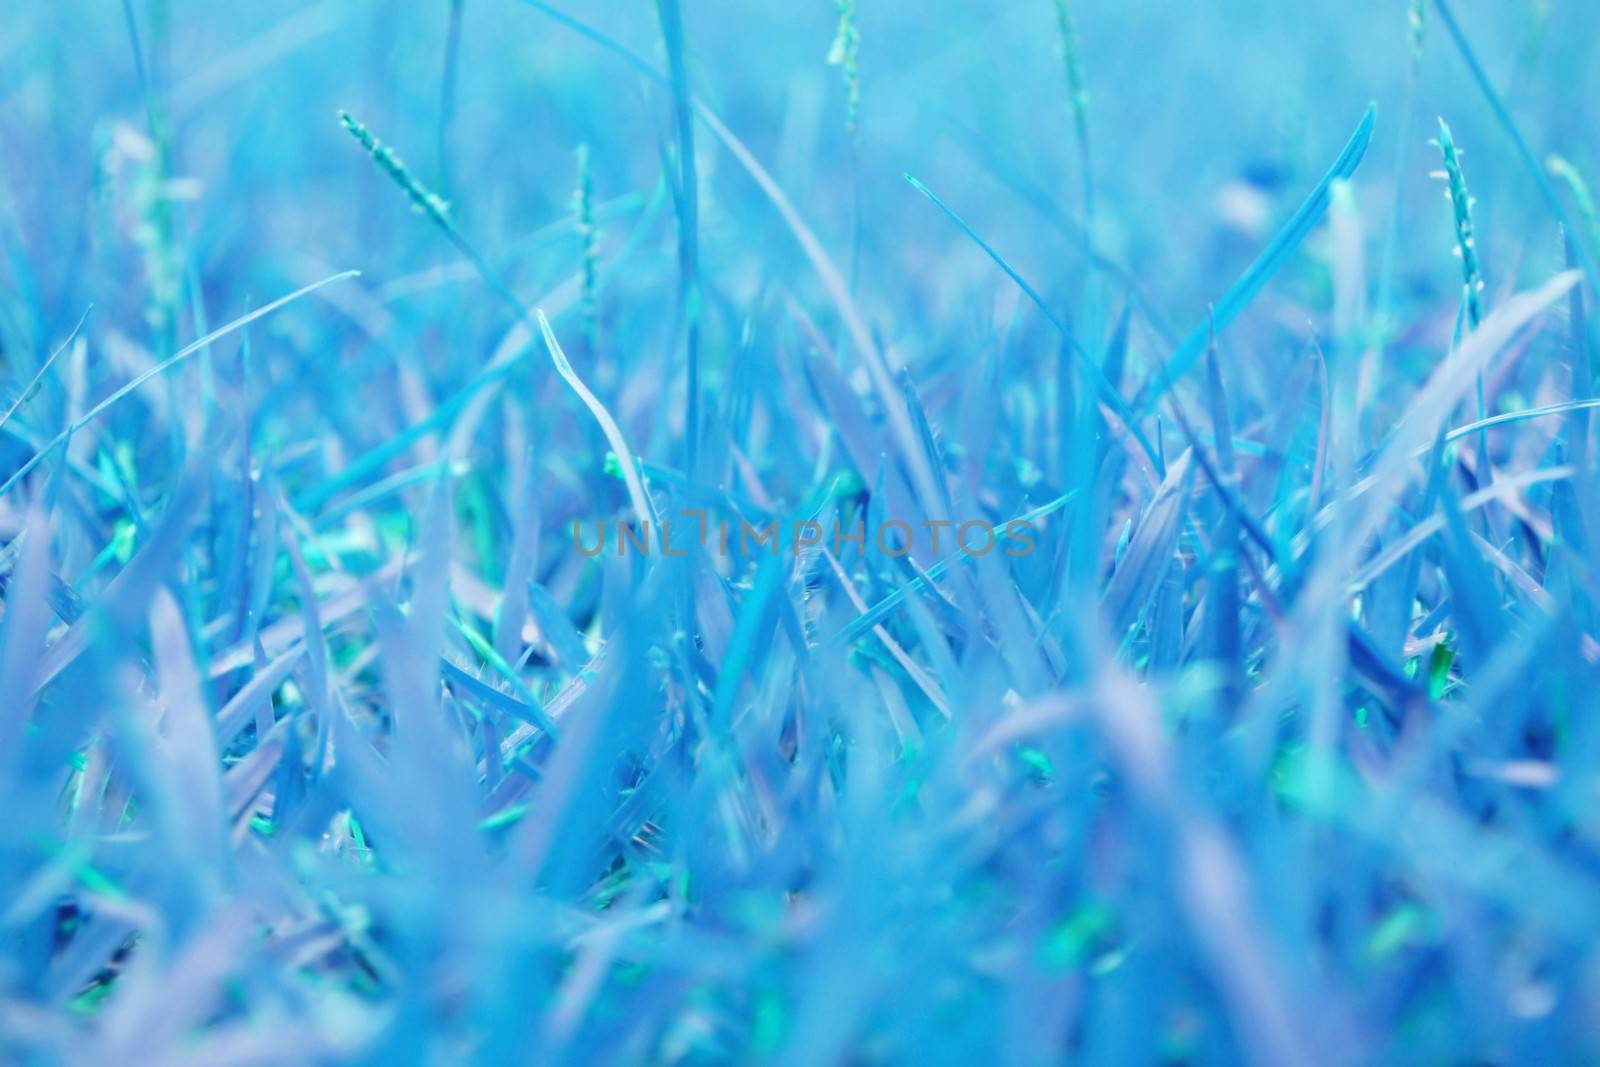 Blue grass in winter freeze for background